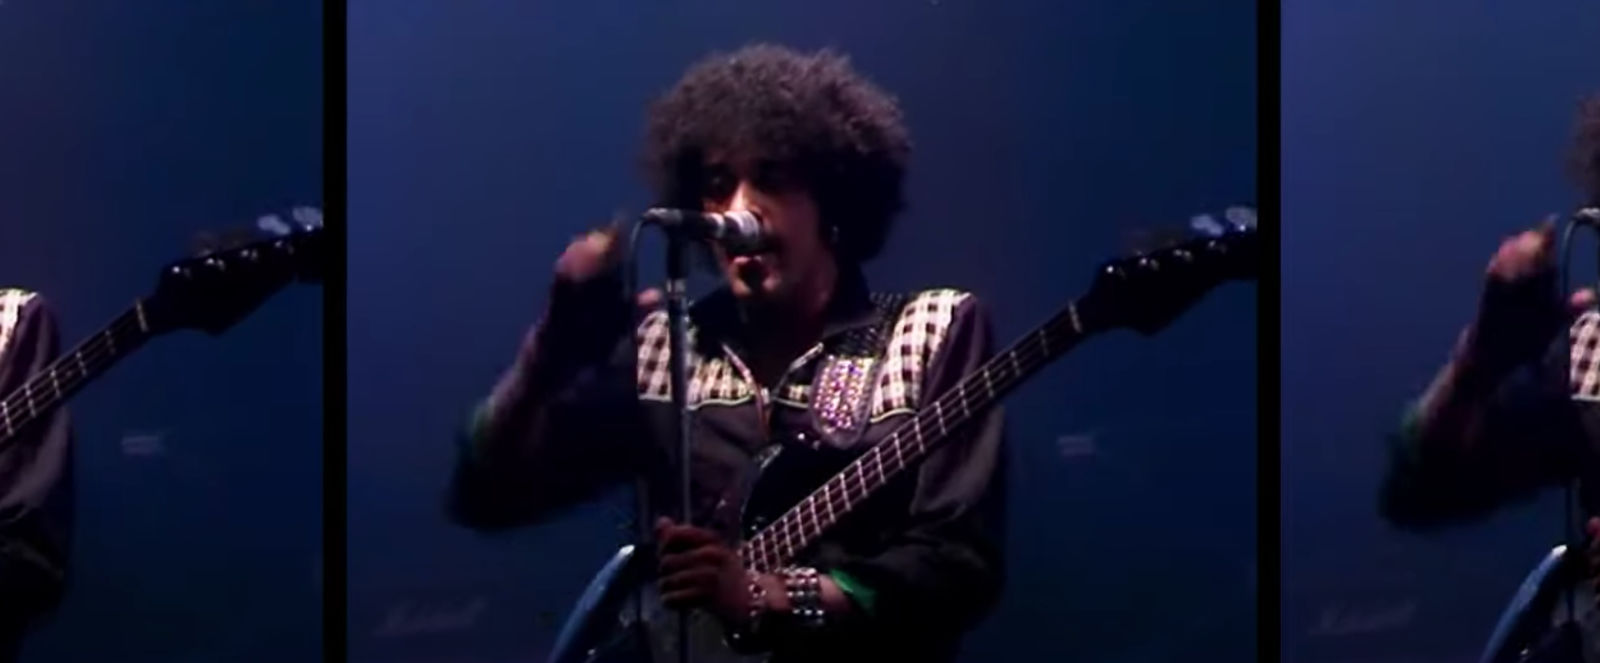 A Song for While Thin Lizzy's Phil Lynott is Away Tim London remembers Phil Lynott as a reluctantly charismatic gang leader to identify with